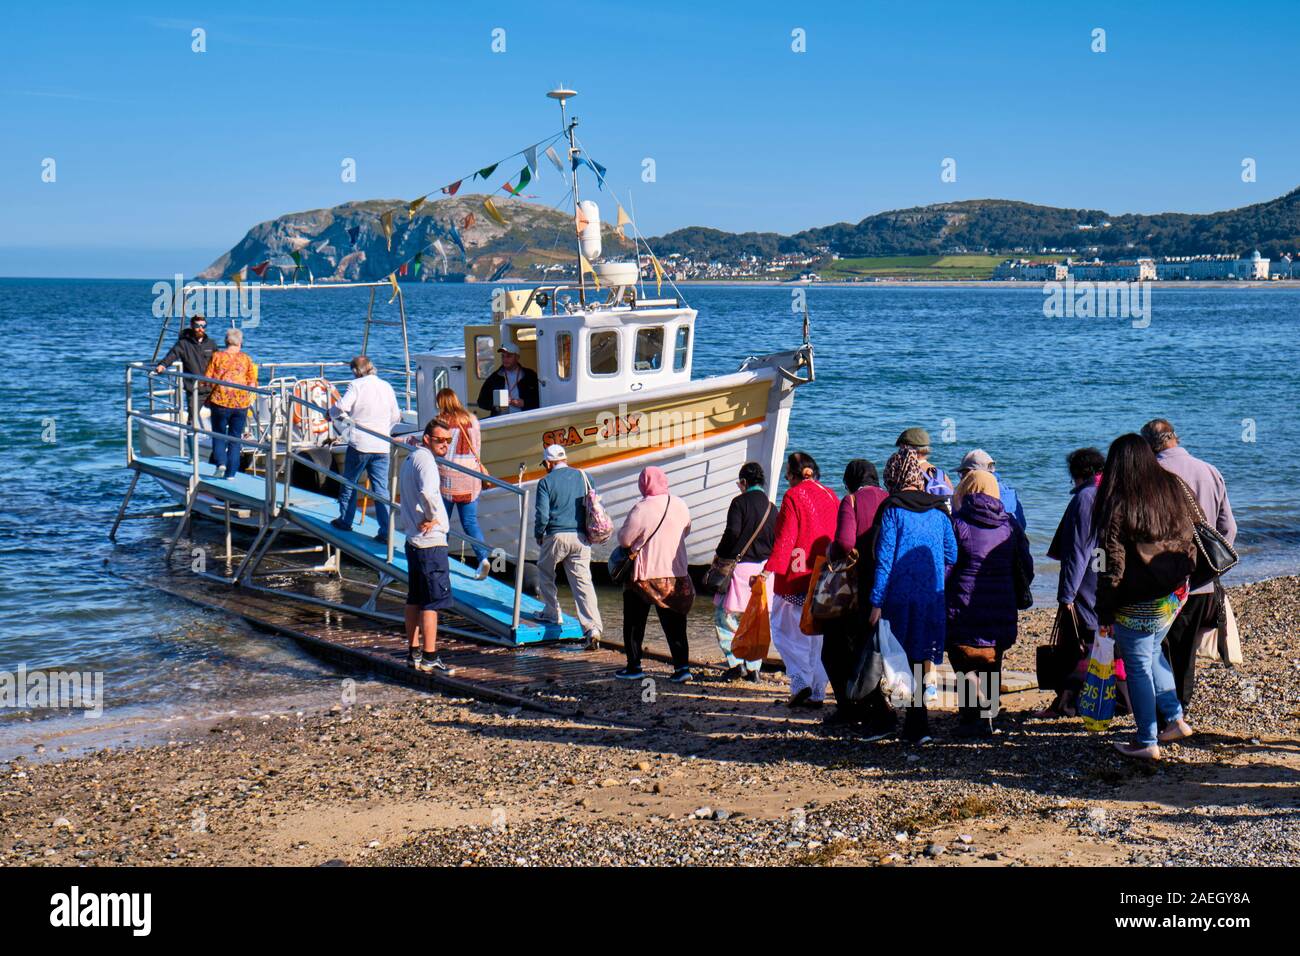 Besucher getting off Tour Boot, whiile andere warten an Bord, am Strand in Llandudno, Wales Hafen Stockfoto